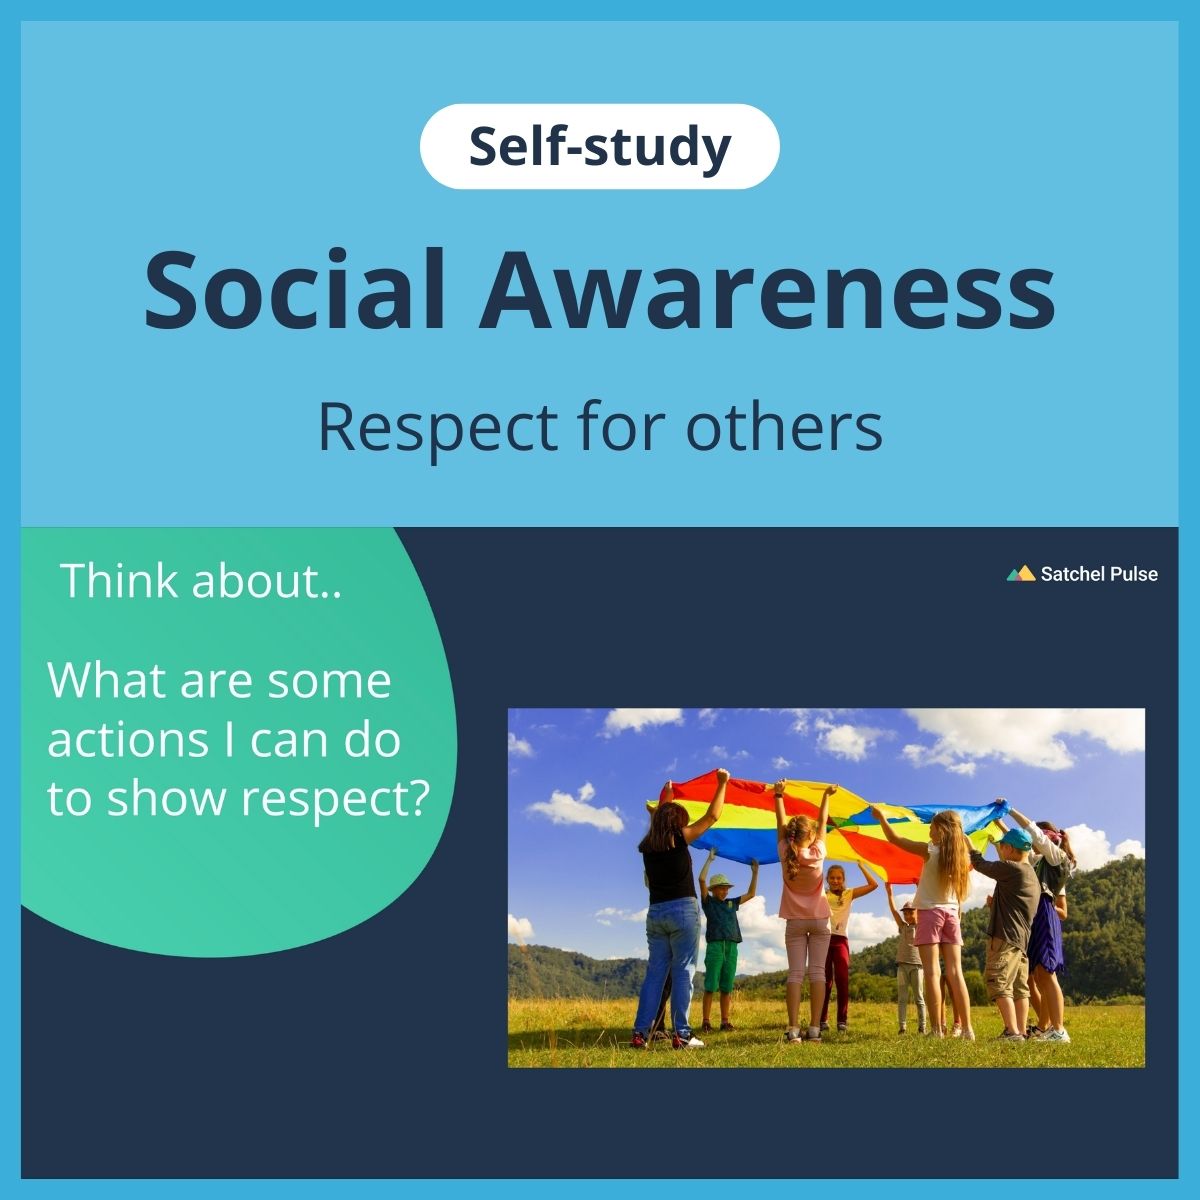 SEL self-study focusing on Respect for Others to use in your classroom as one of your SEL activities for Social Awareness